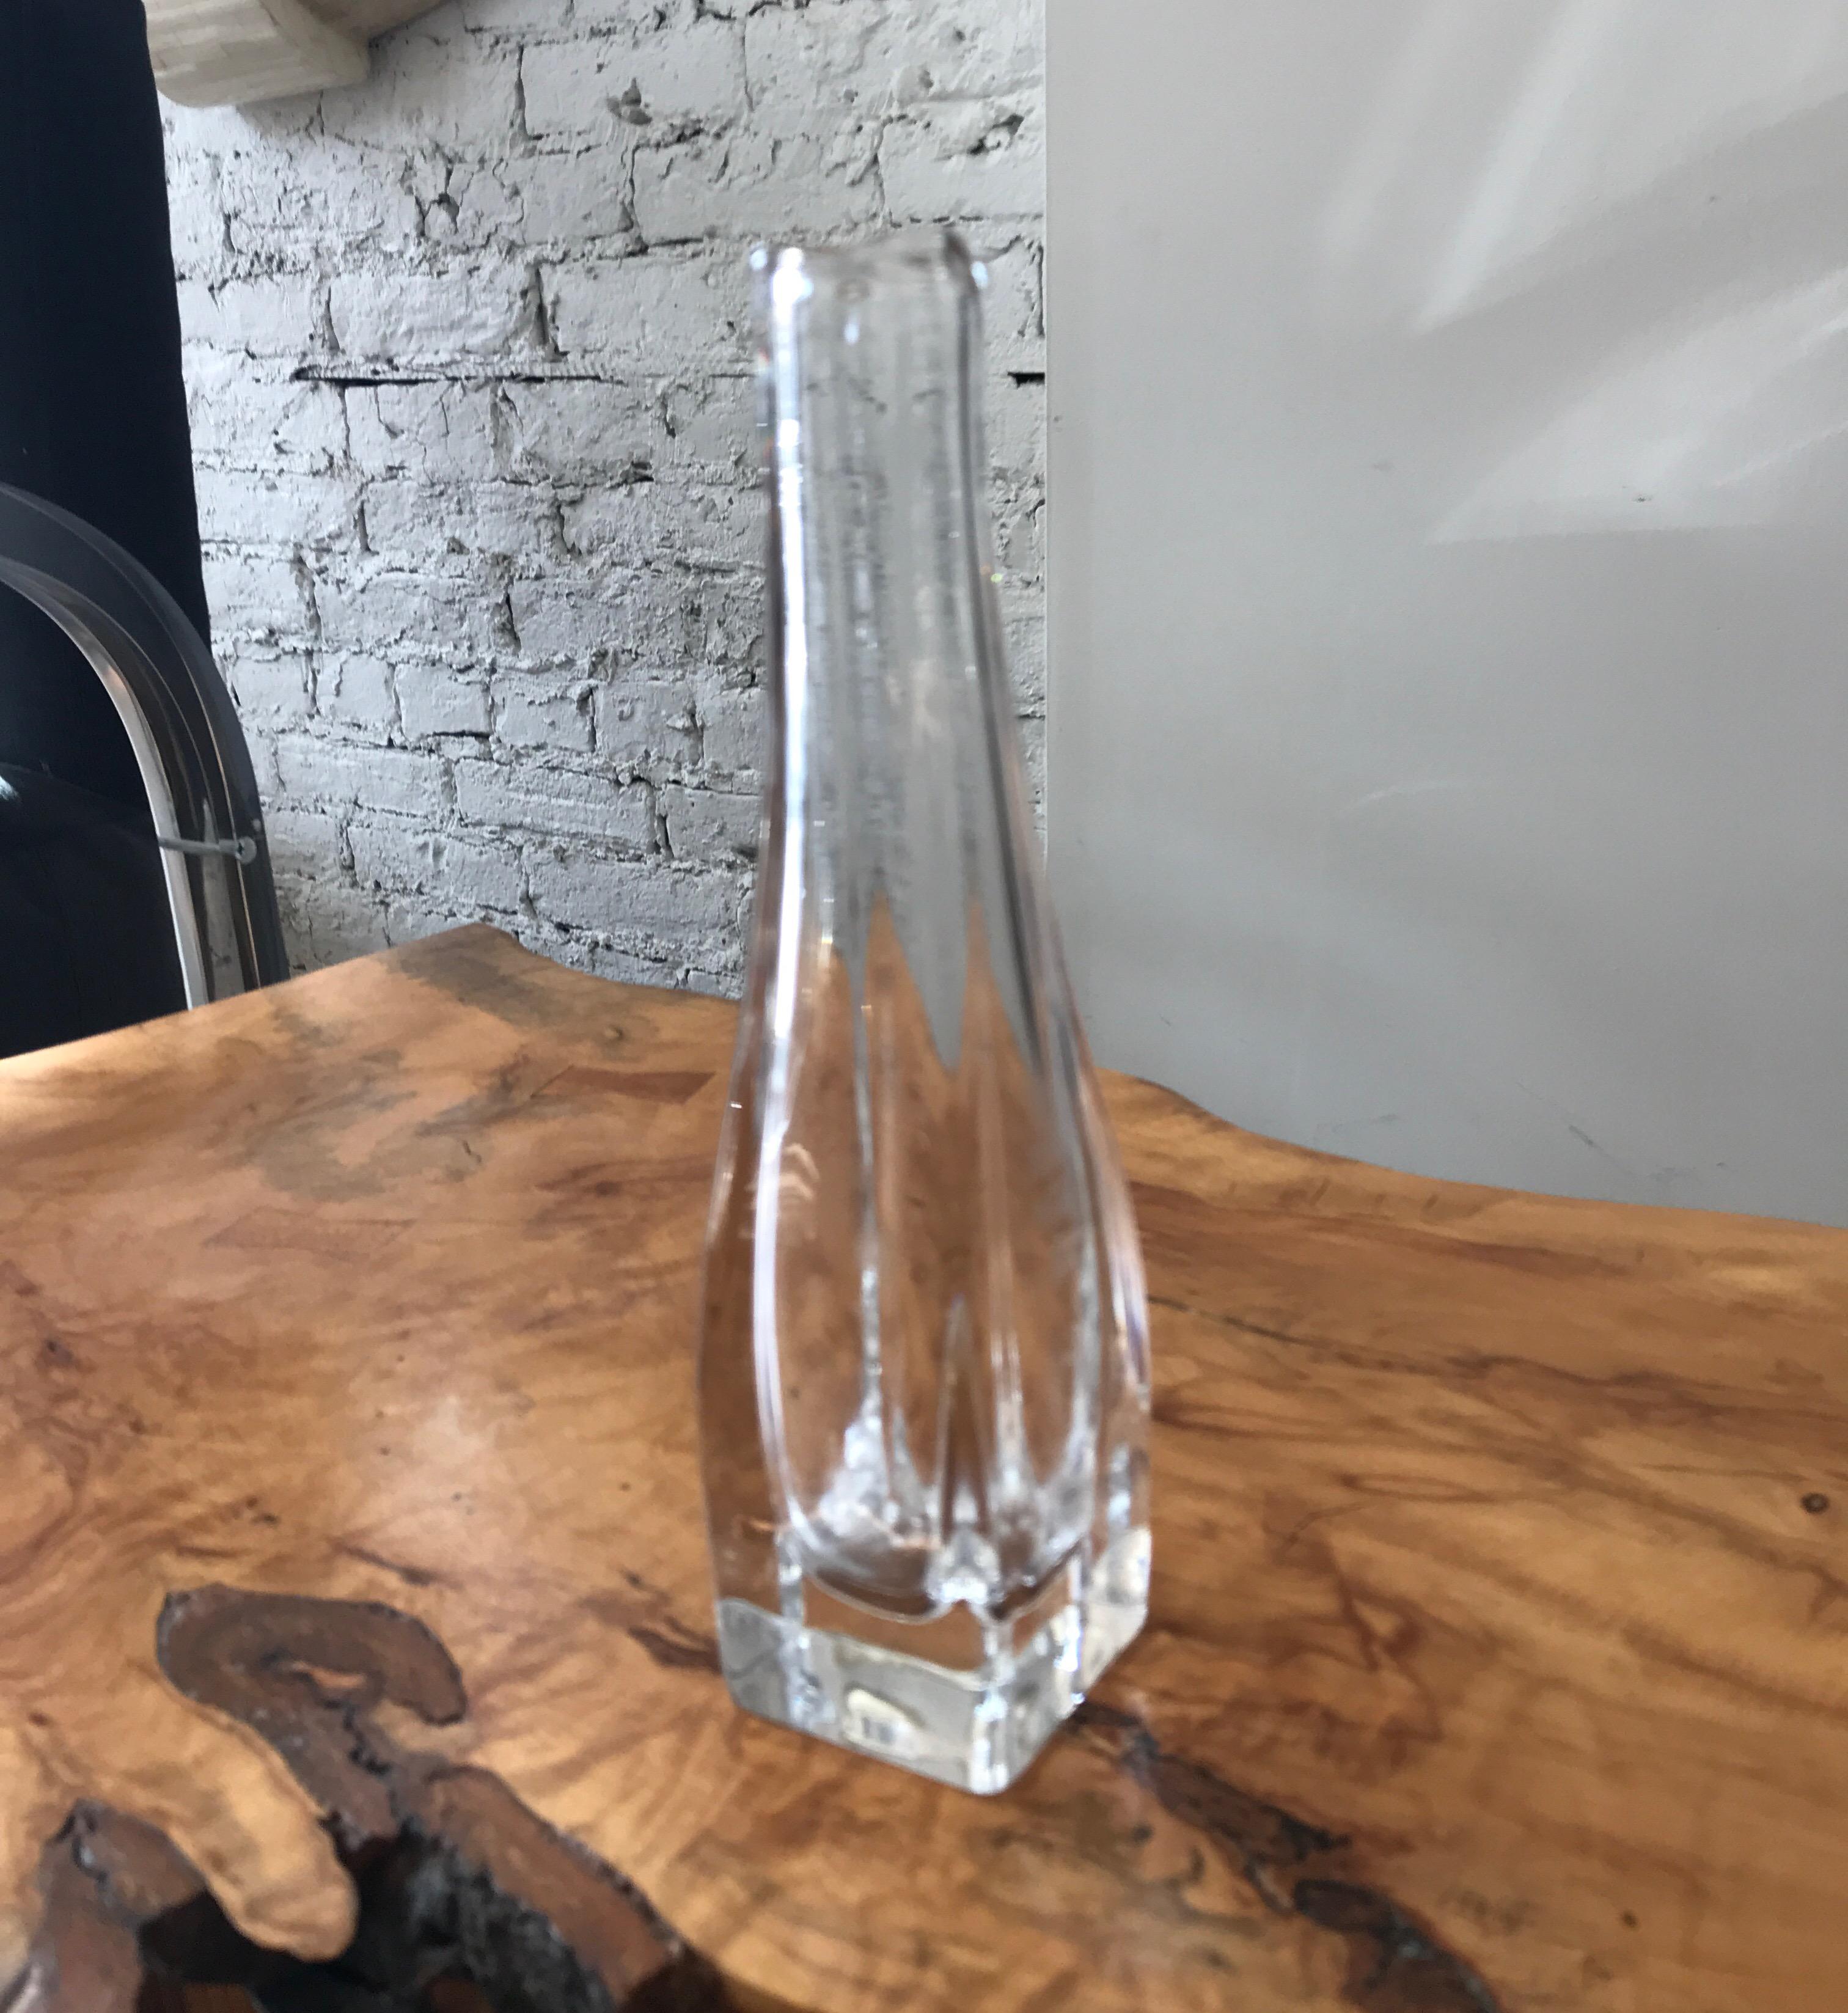 Thick clear glass crystal vase by Orrefors.
Square tapering elegant decorative object.
Fine midcentury tabletop decor.
Stamped Orrefors to the underside.